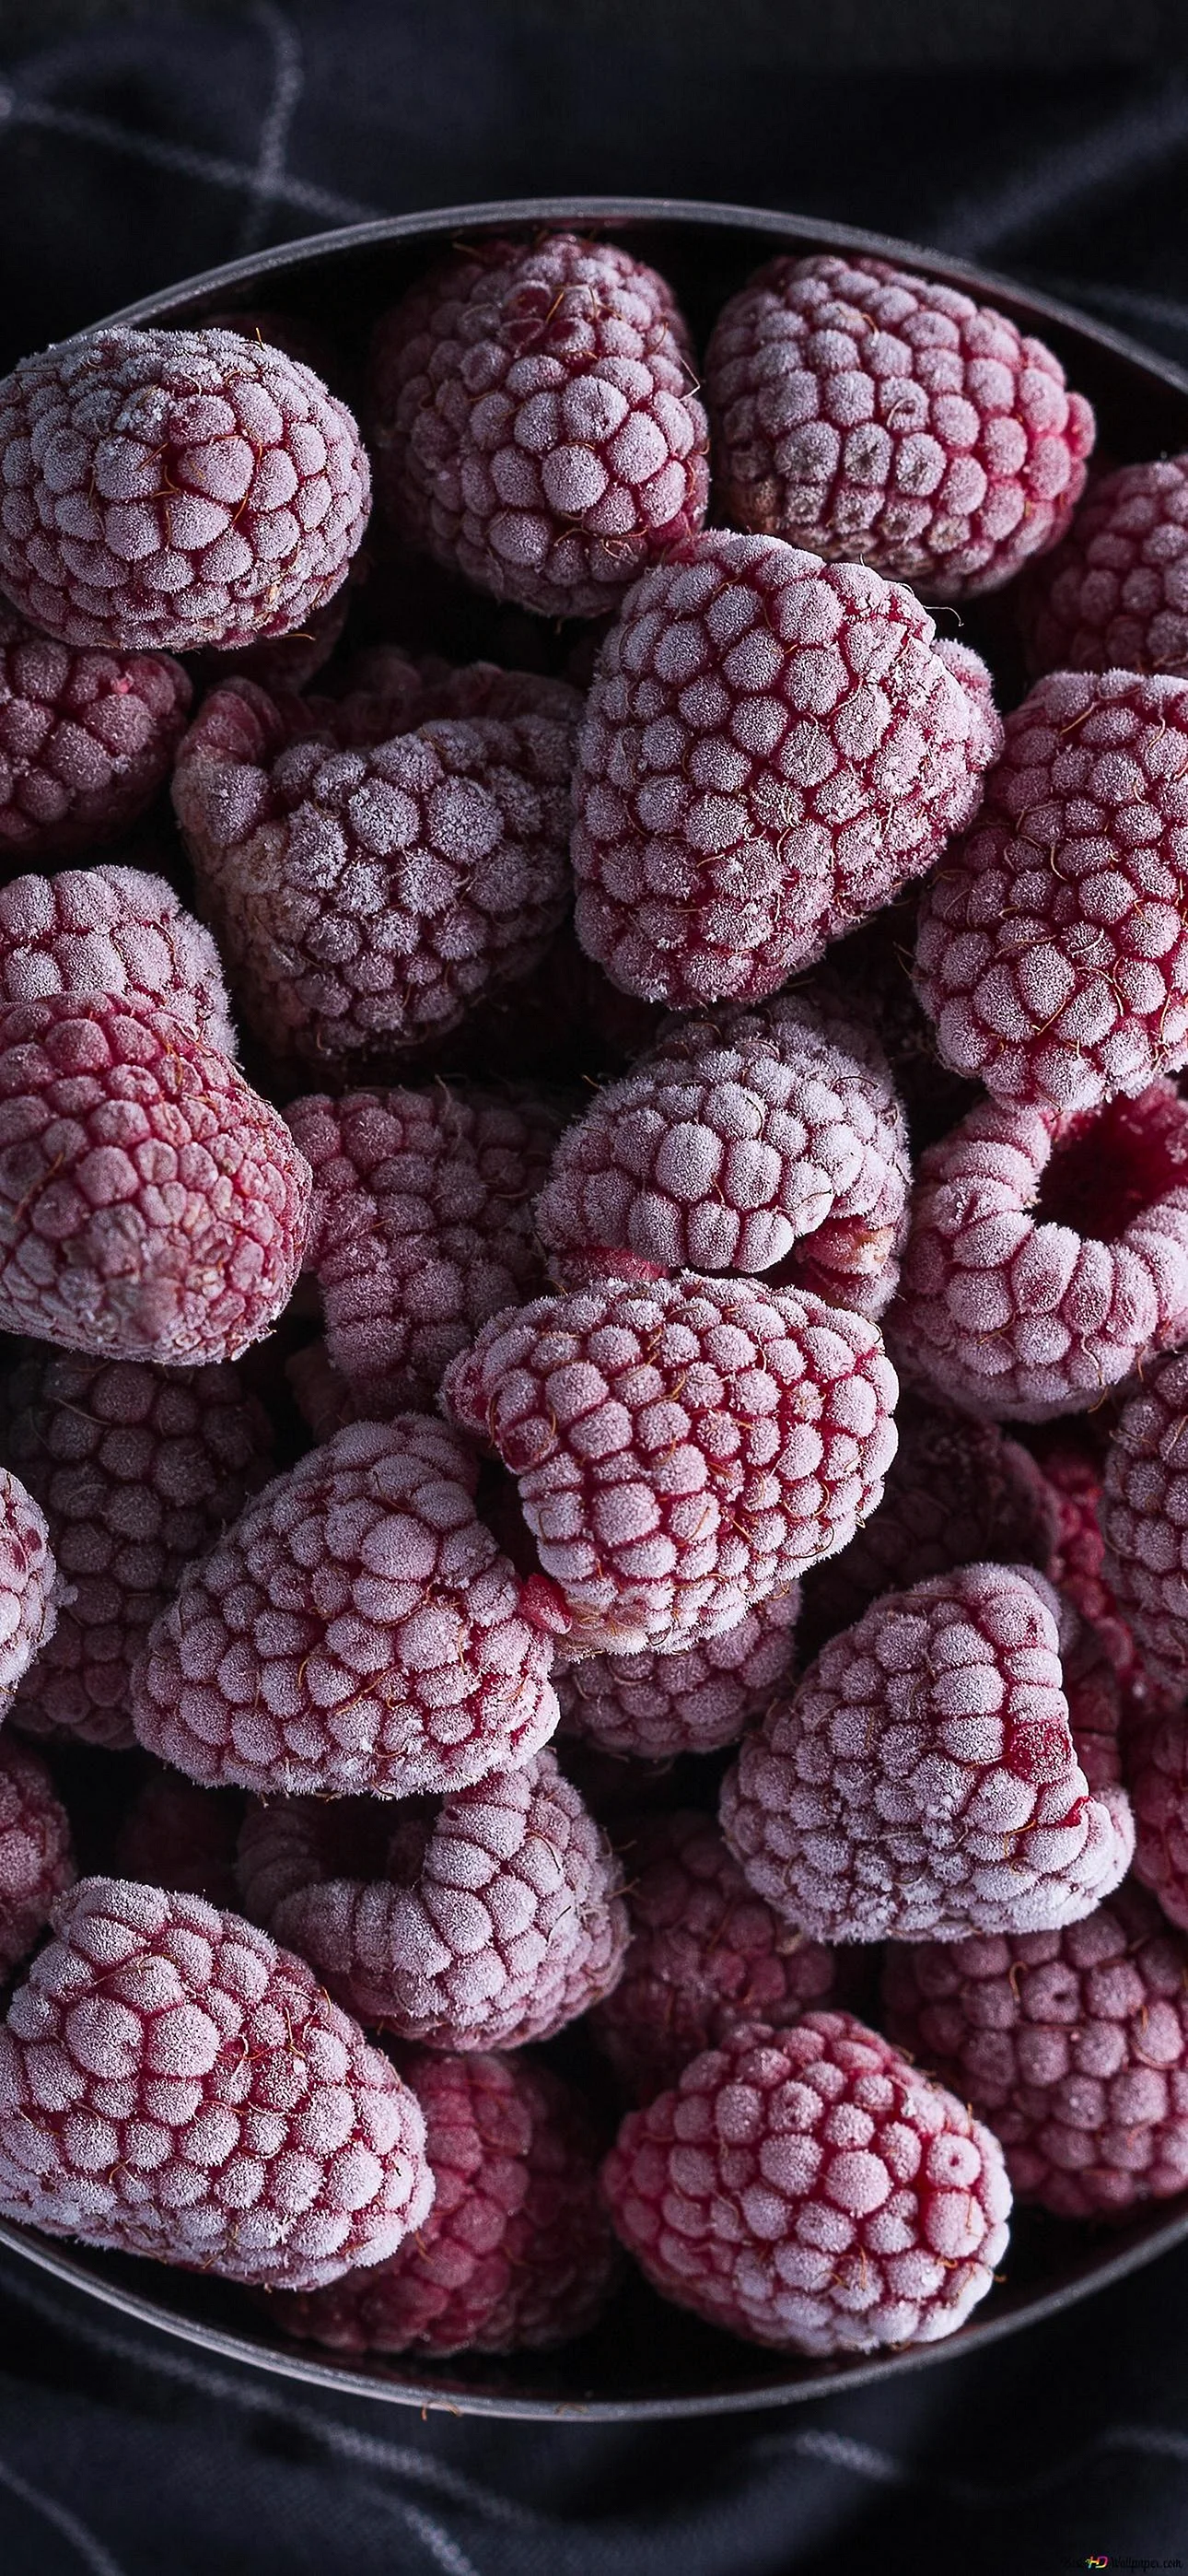 Frozen Fruits Wallpaper for iPhone 14 Pro Max